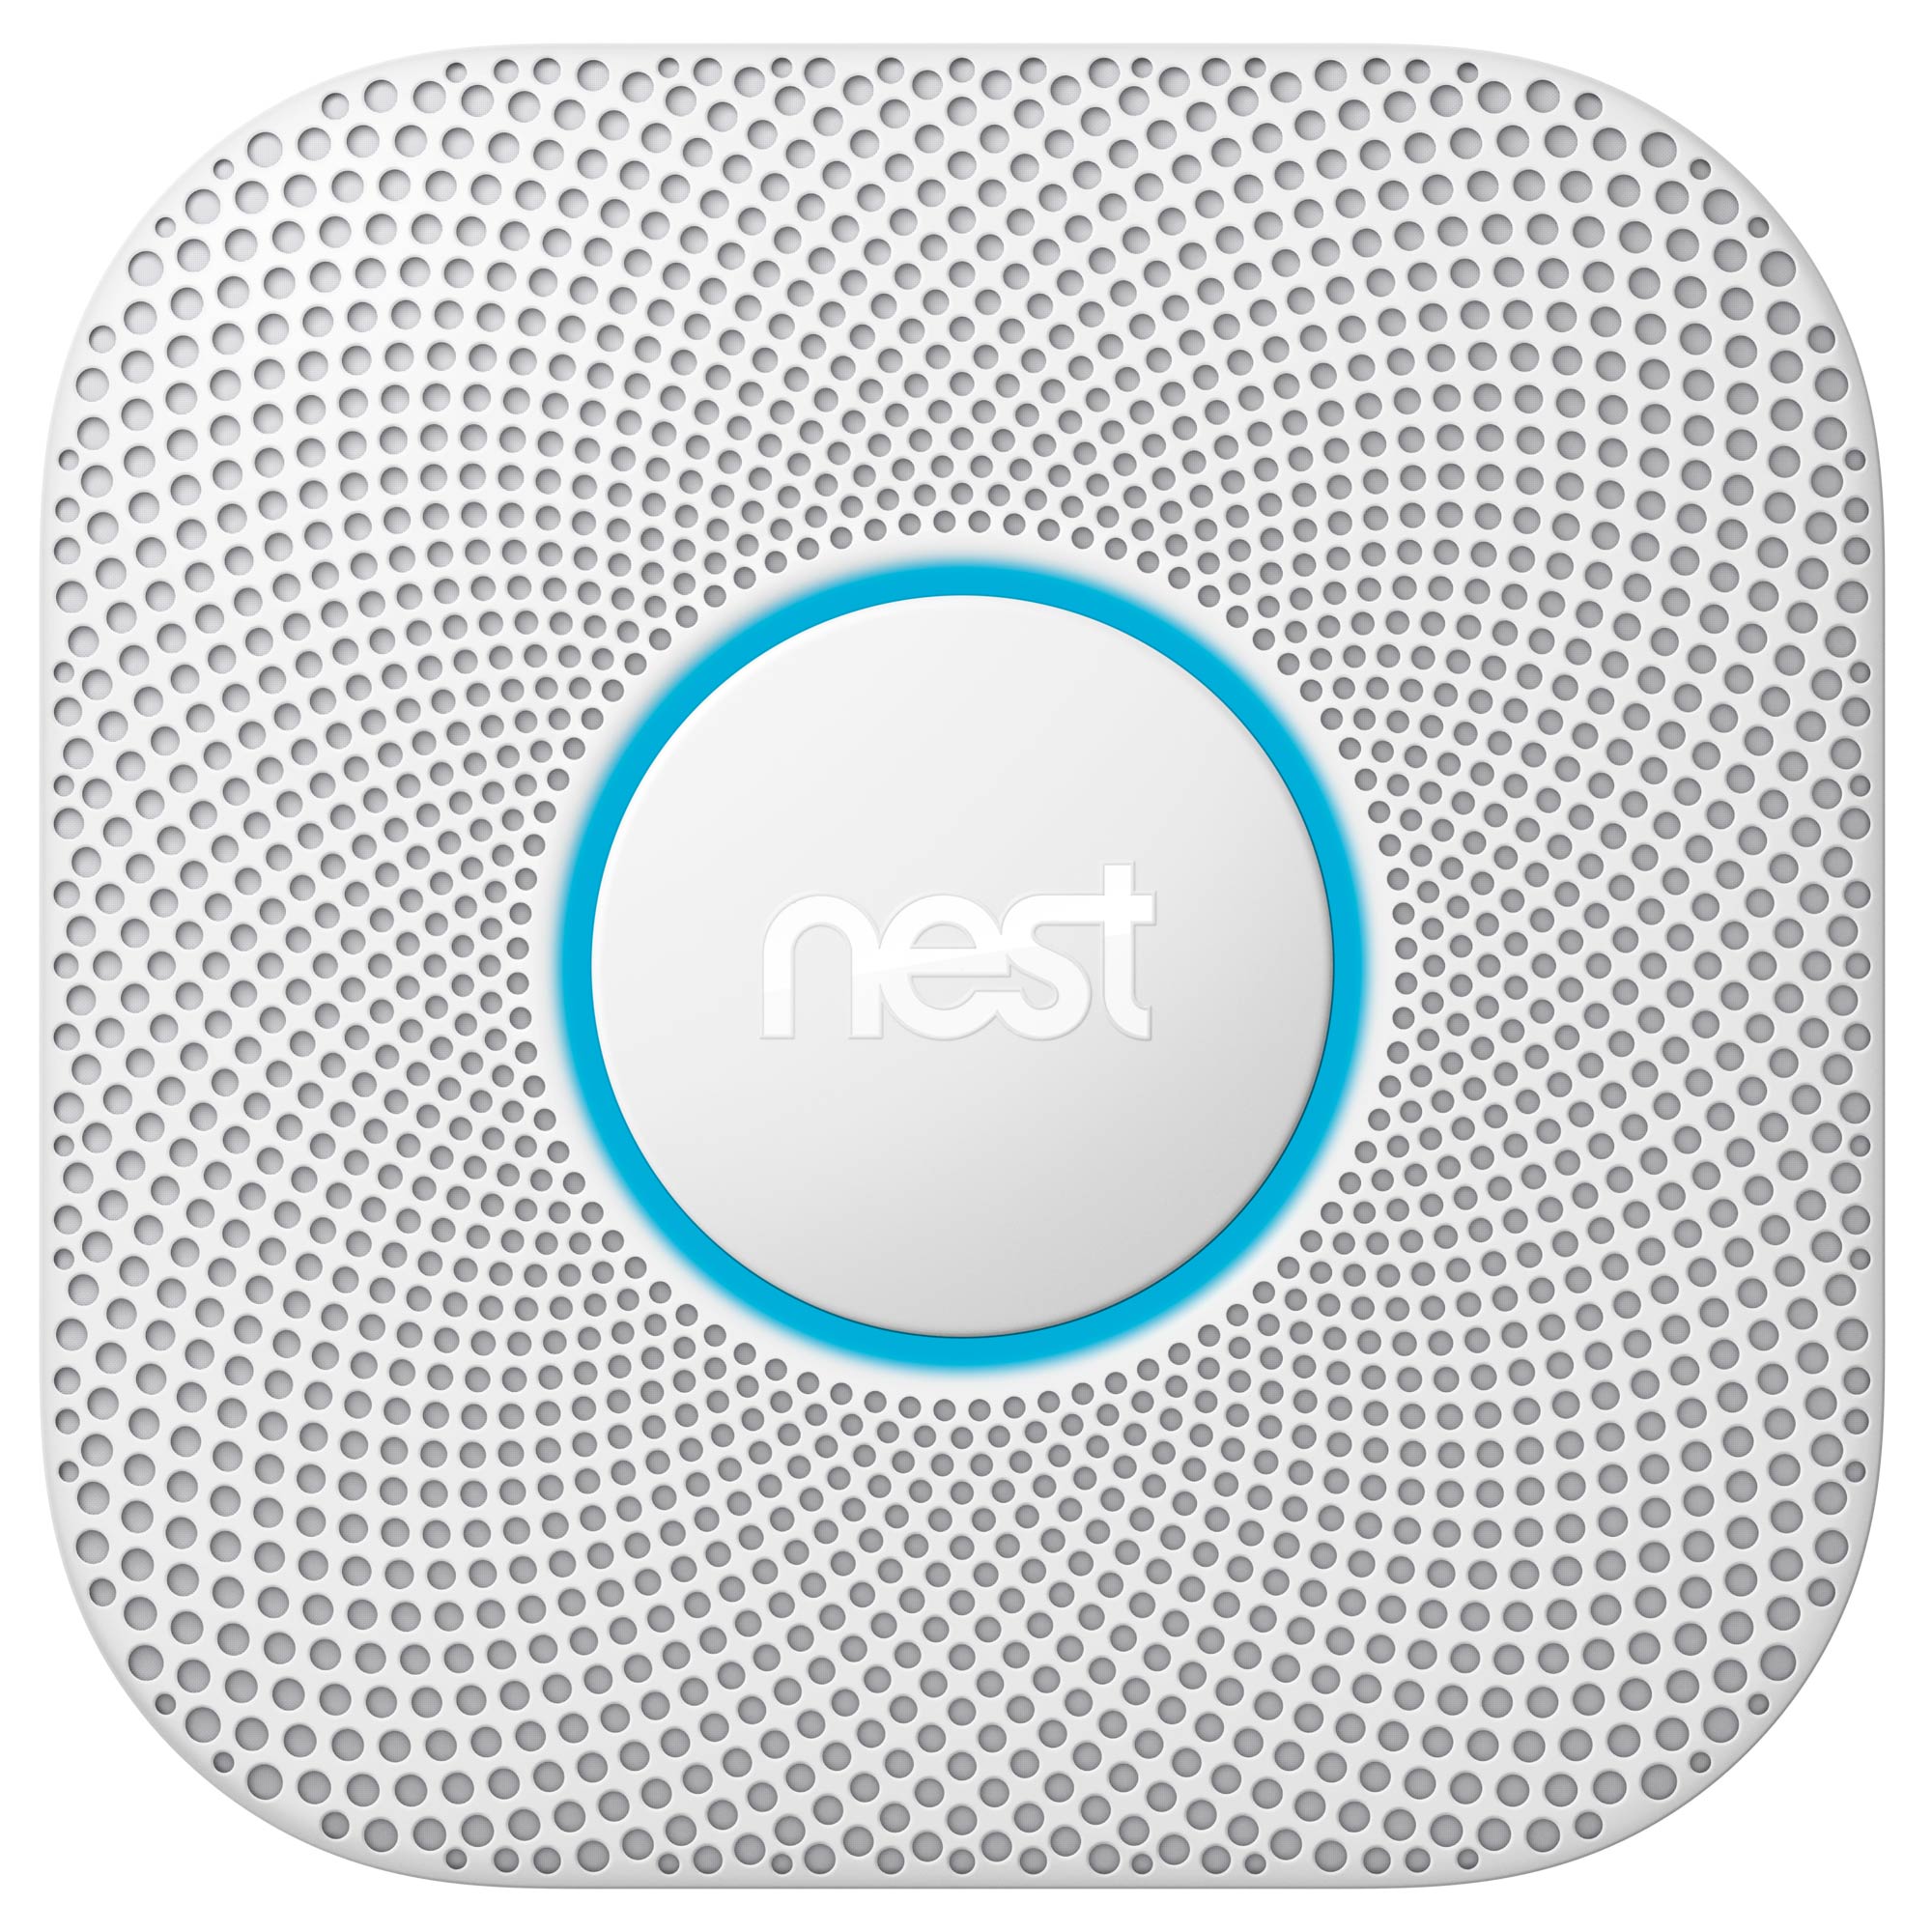 Nest S3003LWGB Protect 2nd Gen Mains Smoke and CO Alarm